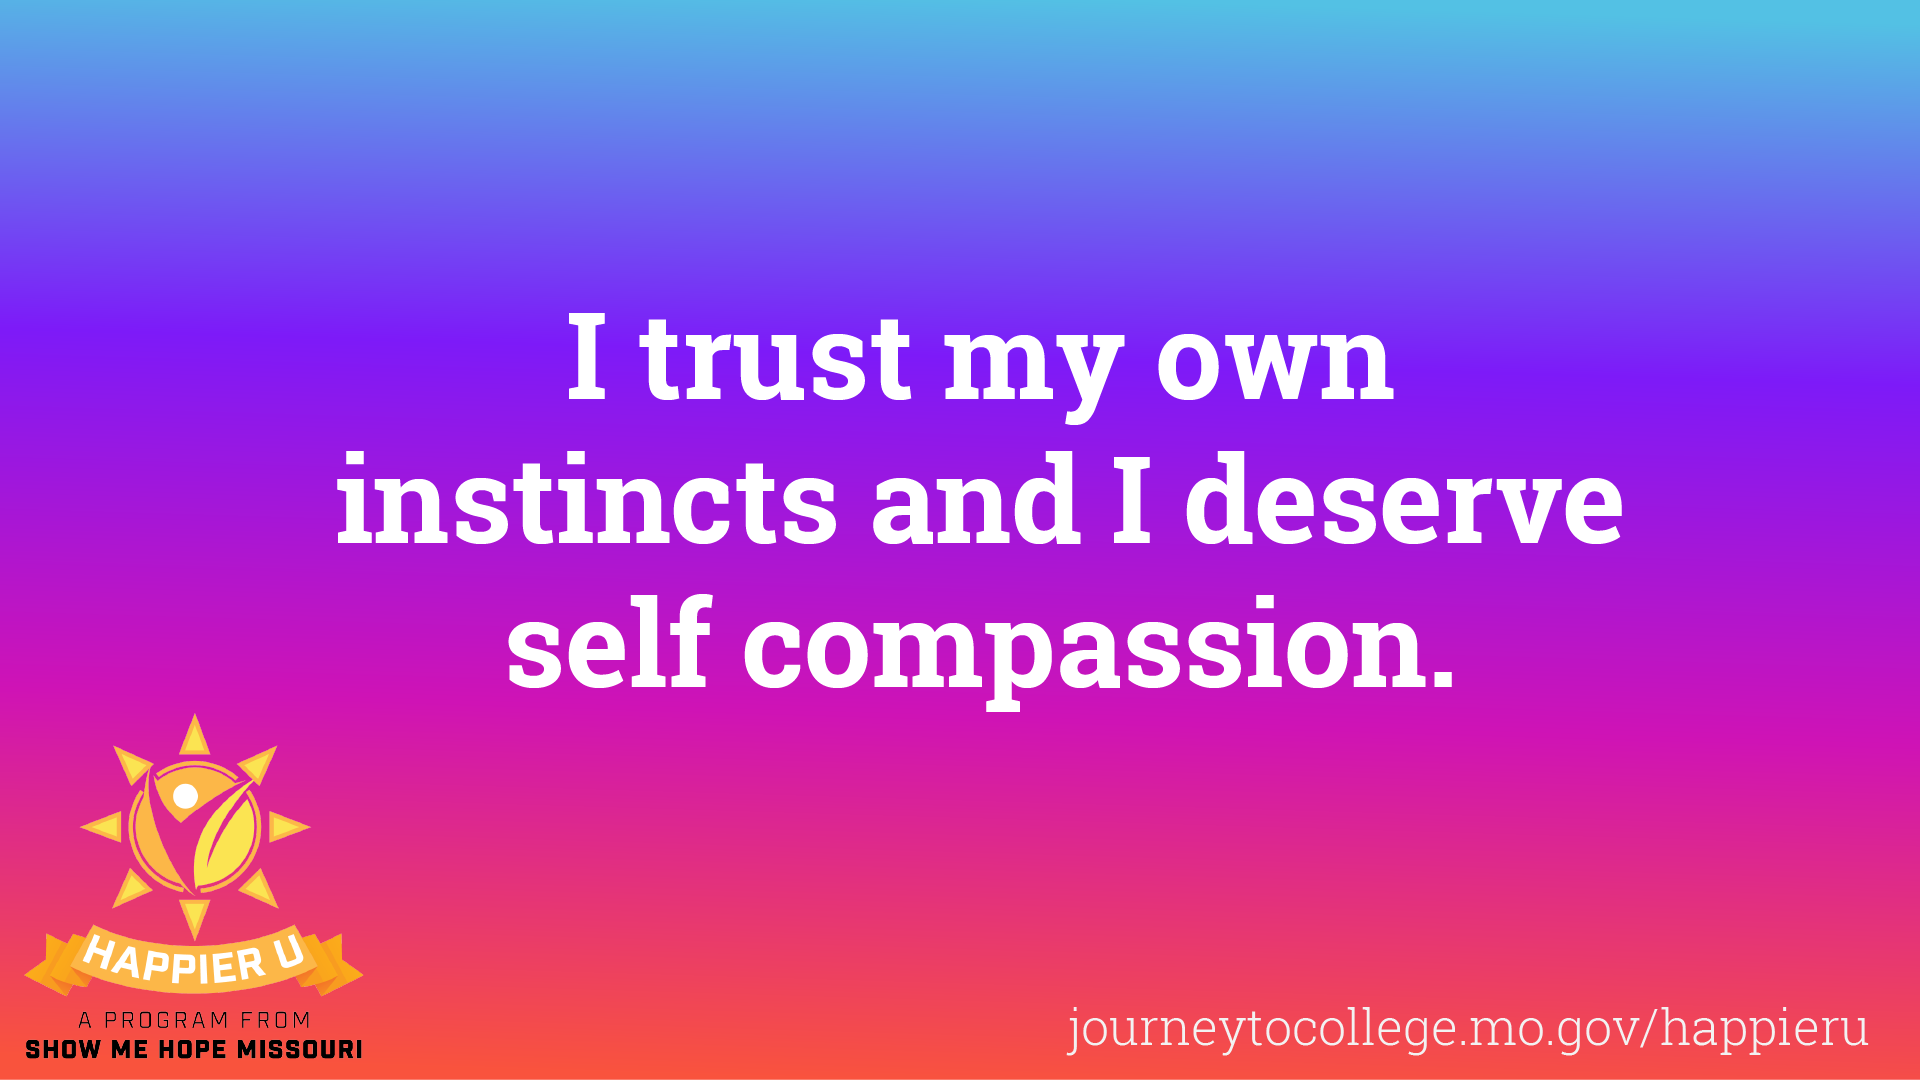 "I trust my own instincts and I deserve self compassion"